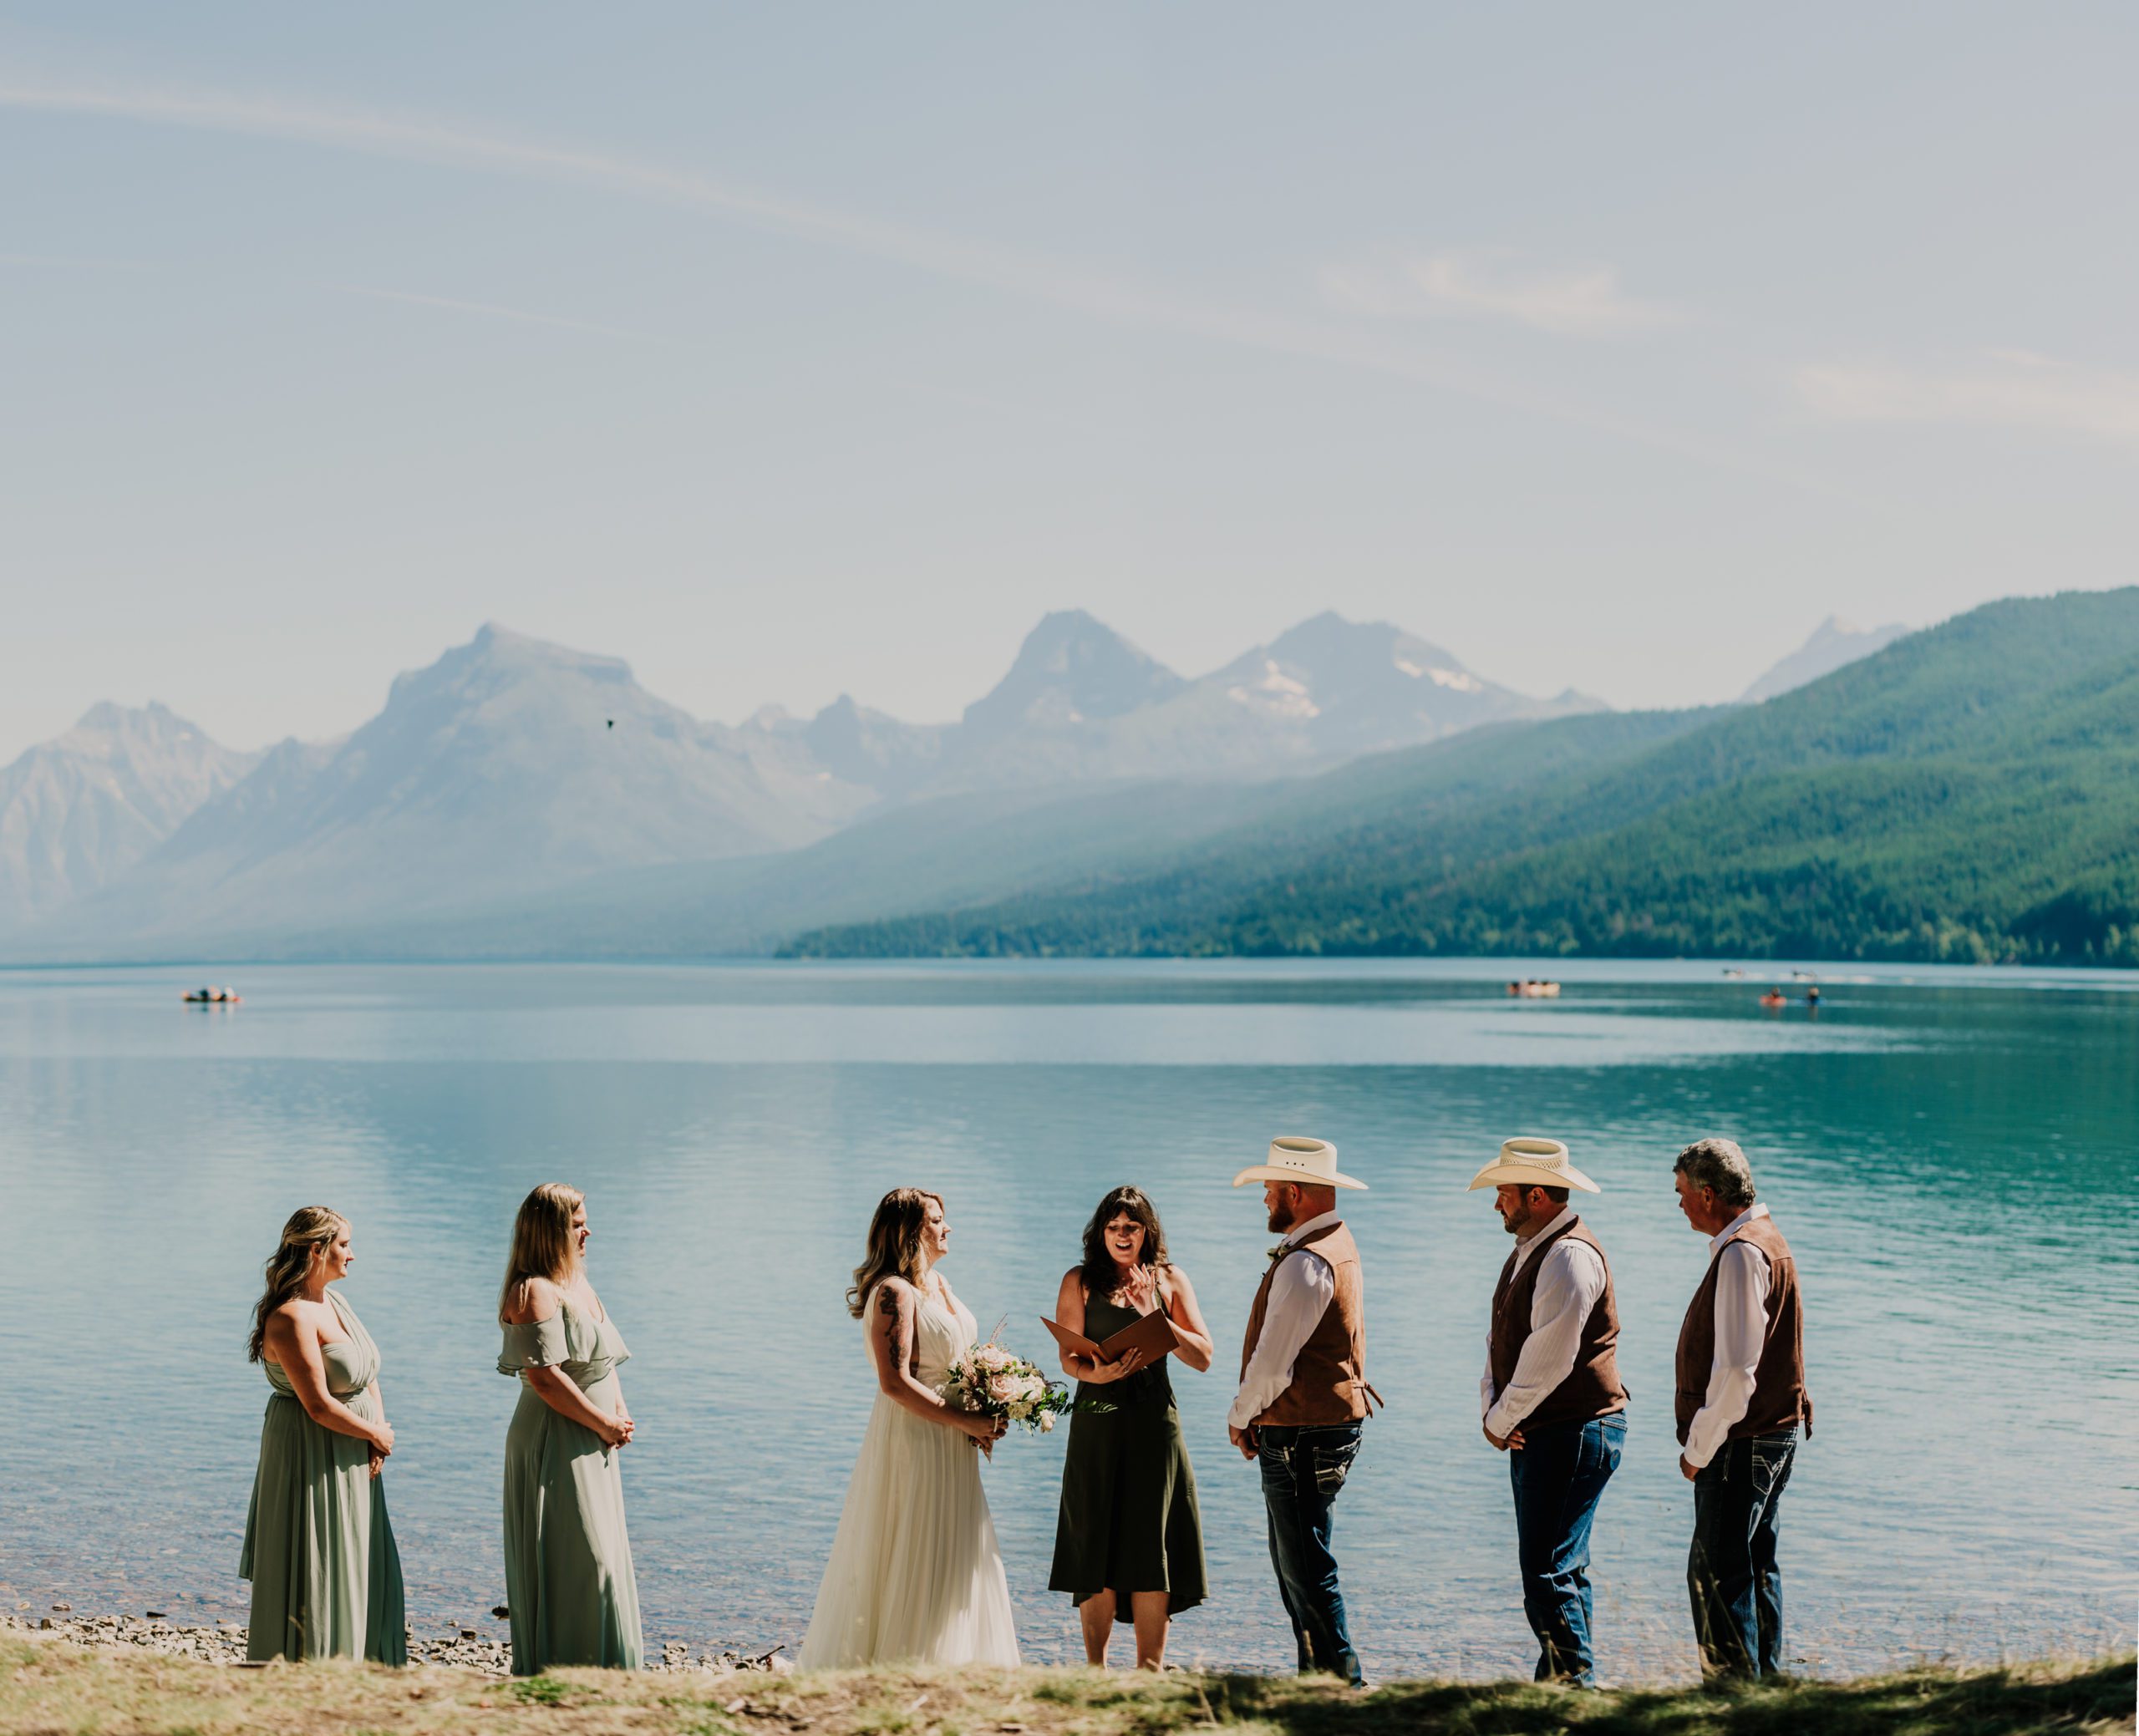 Glacier park elopement at Logan Pass. Bride and groom getting married on Lake McDonald. Going to the sun road. Where to get married in Glacier National Park. 